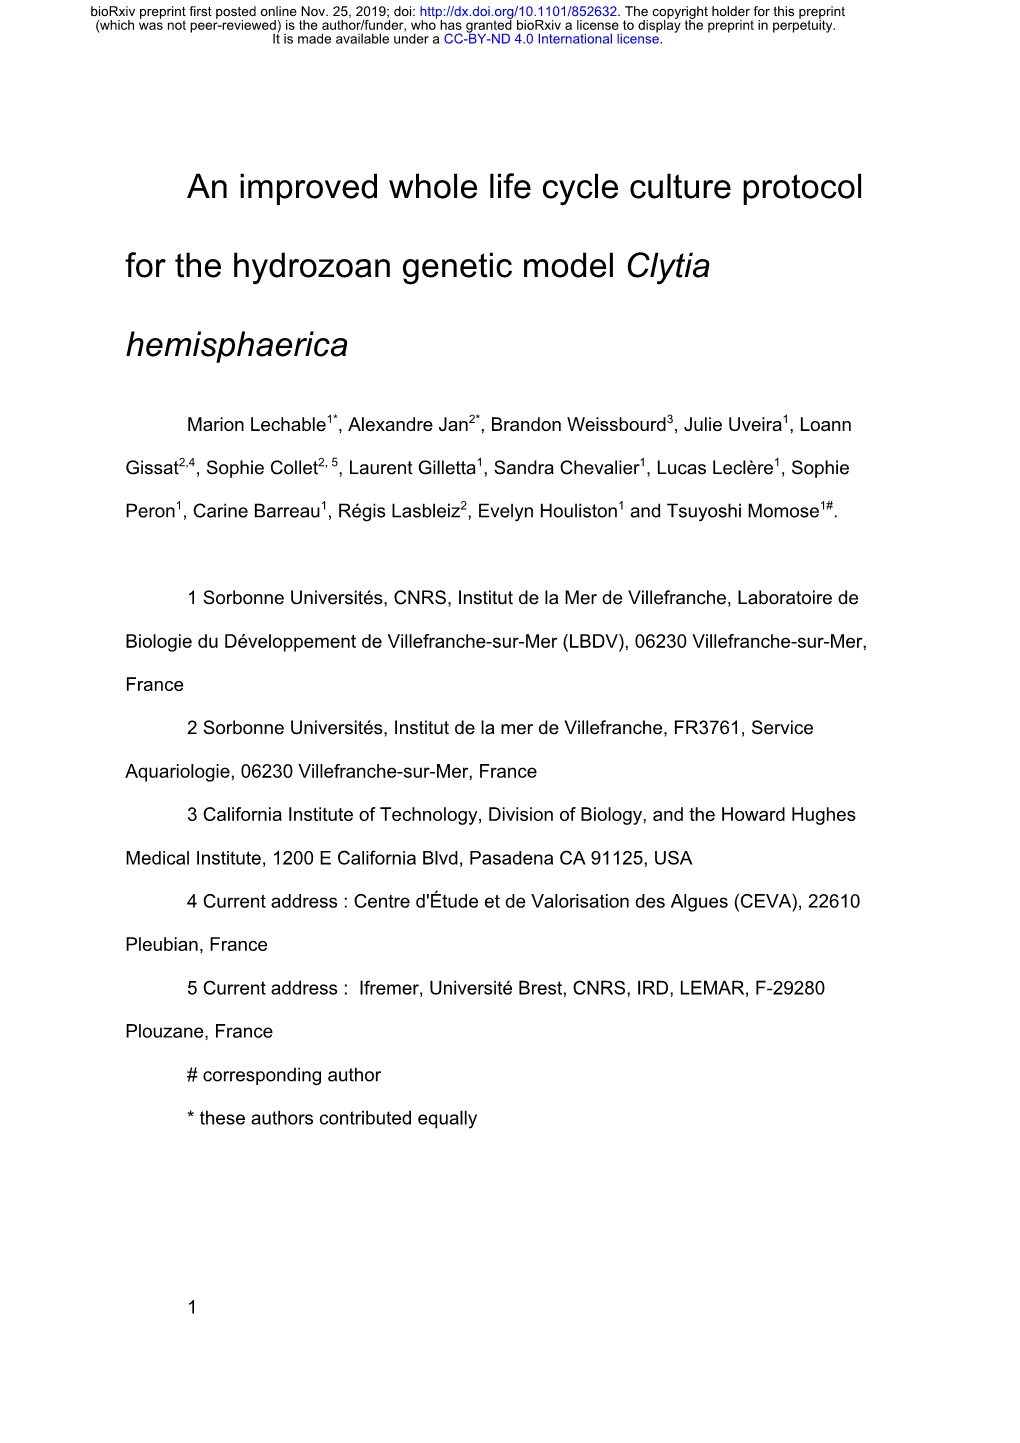 An Improved Whole Life Cycle Culture Protocol for the Hydrozoan Genetic Model Clytia Hemisphaerica, Lechable Et Al.) Biorxiv Preprint First Posted Online Nov